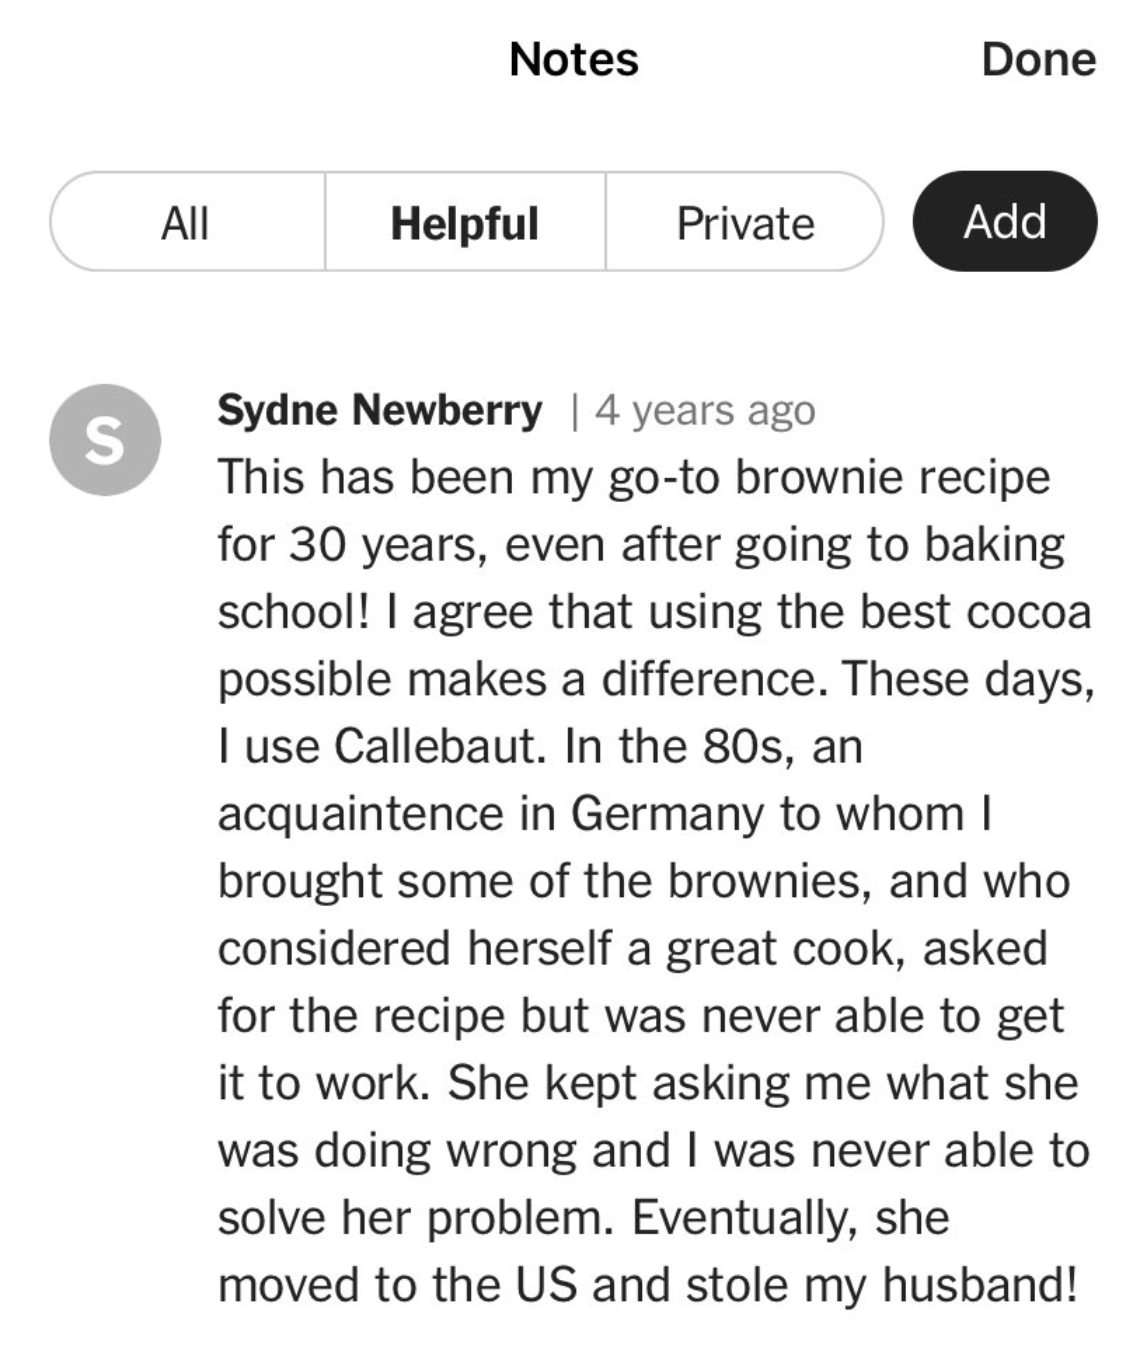 A comment someone left on a recipe that says their friend could never get the recipe right and then later stole her husband